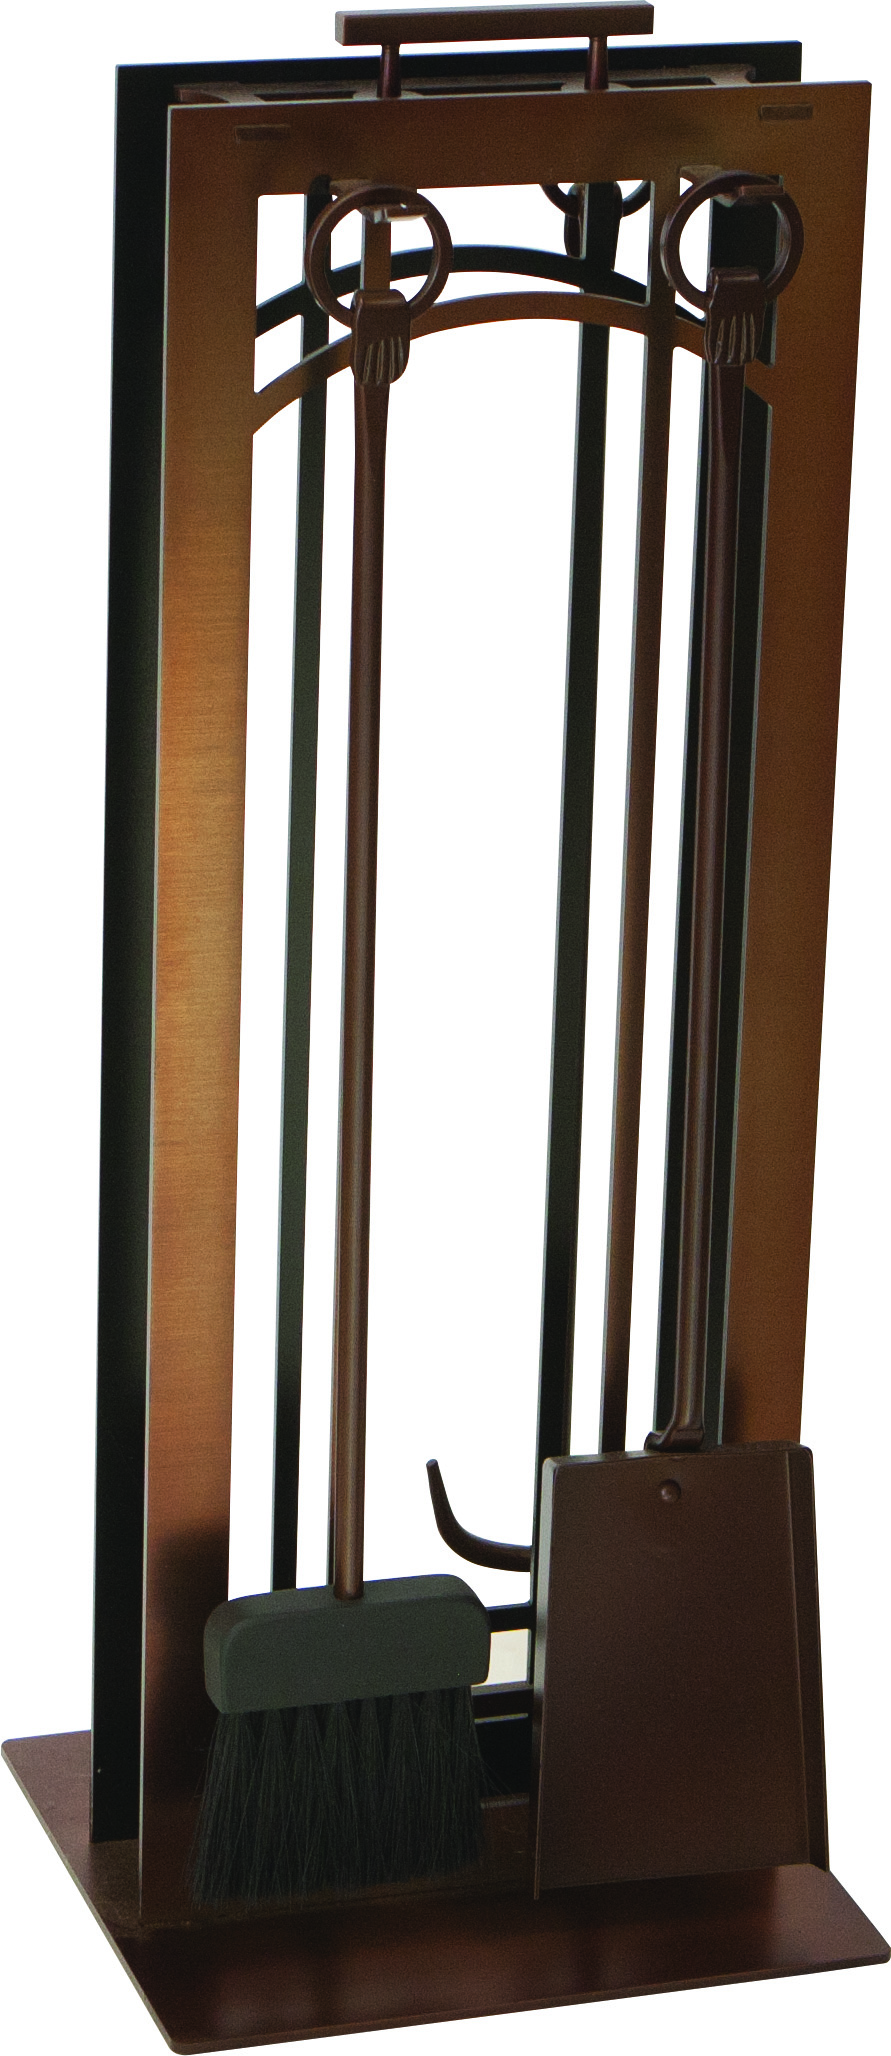 This Black Wrought Iron Fireplace Tool Set is a beautiful addition to any traditional or old world style fireplace!